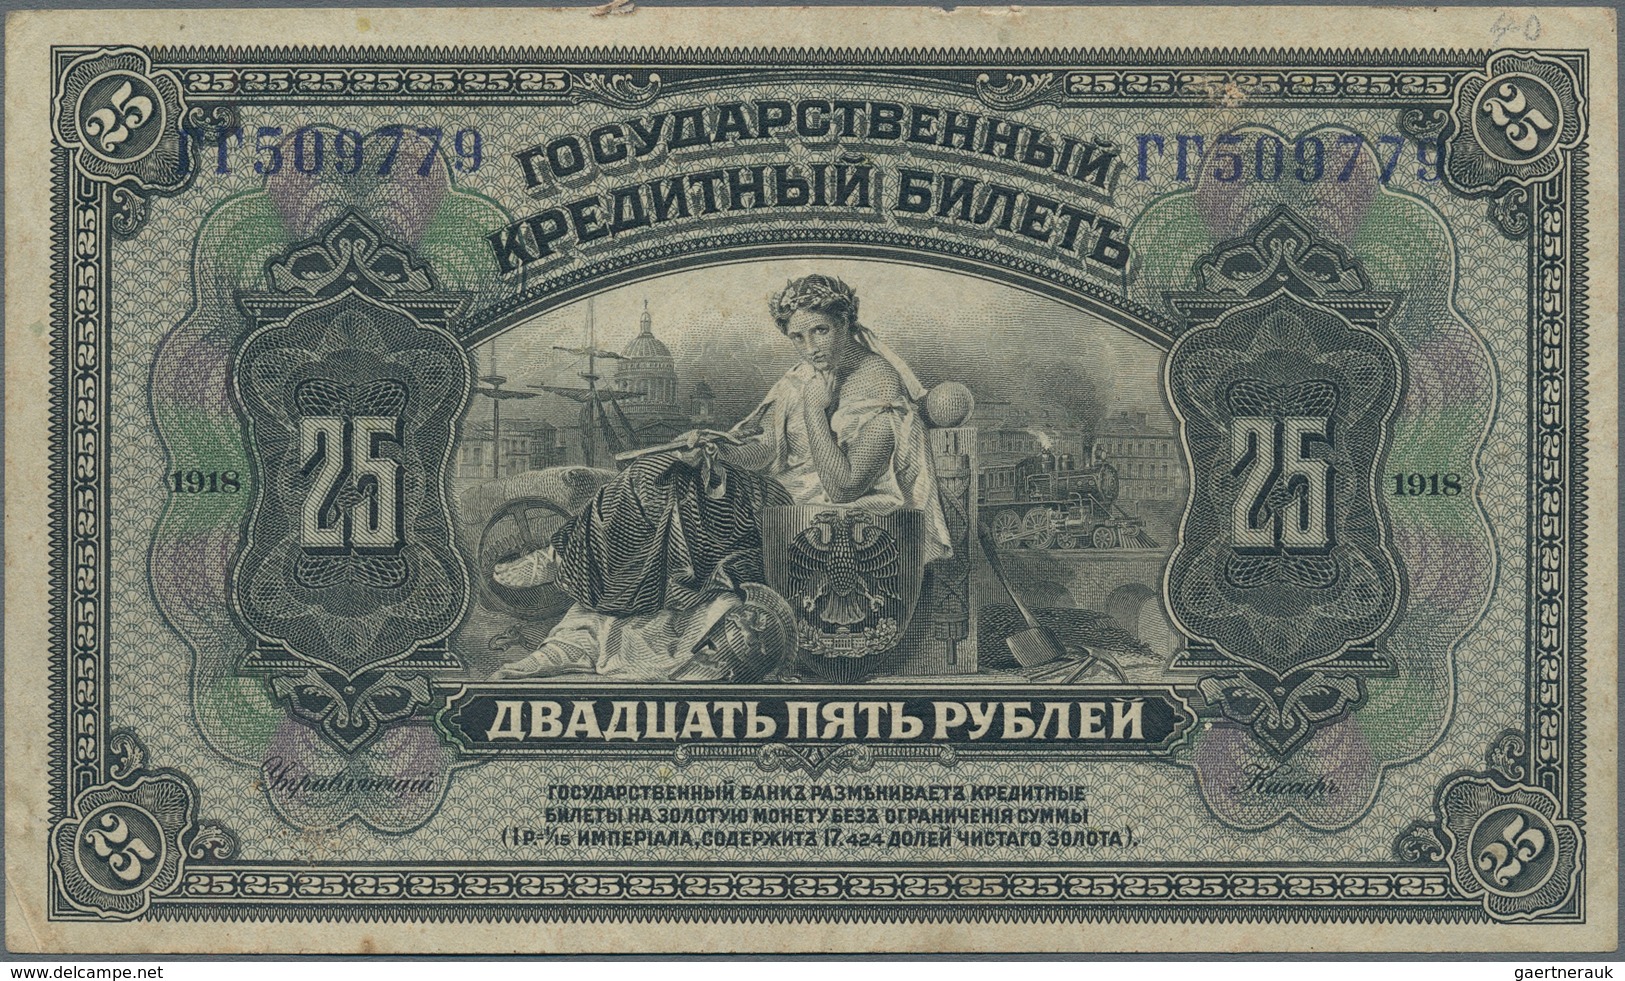 Alle Welt: Collectors album with about 340 banknotes, mainly Russia and former Soviet States, but al